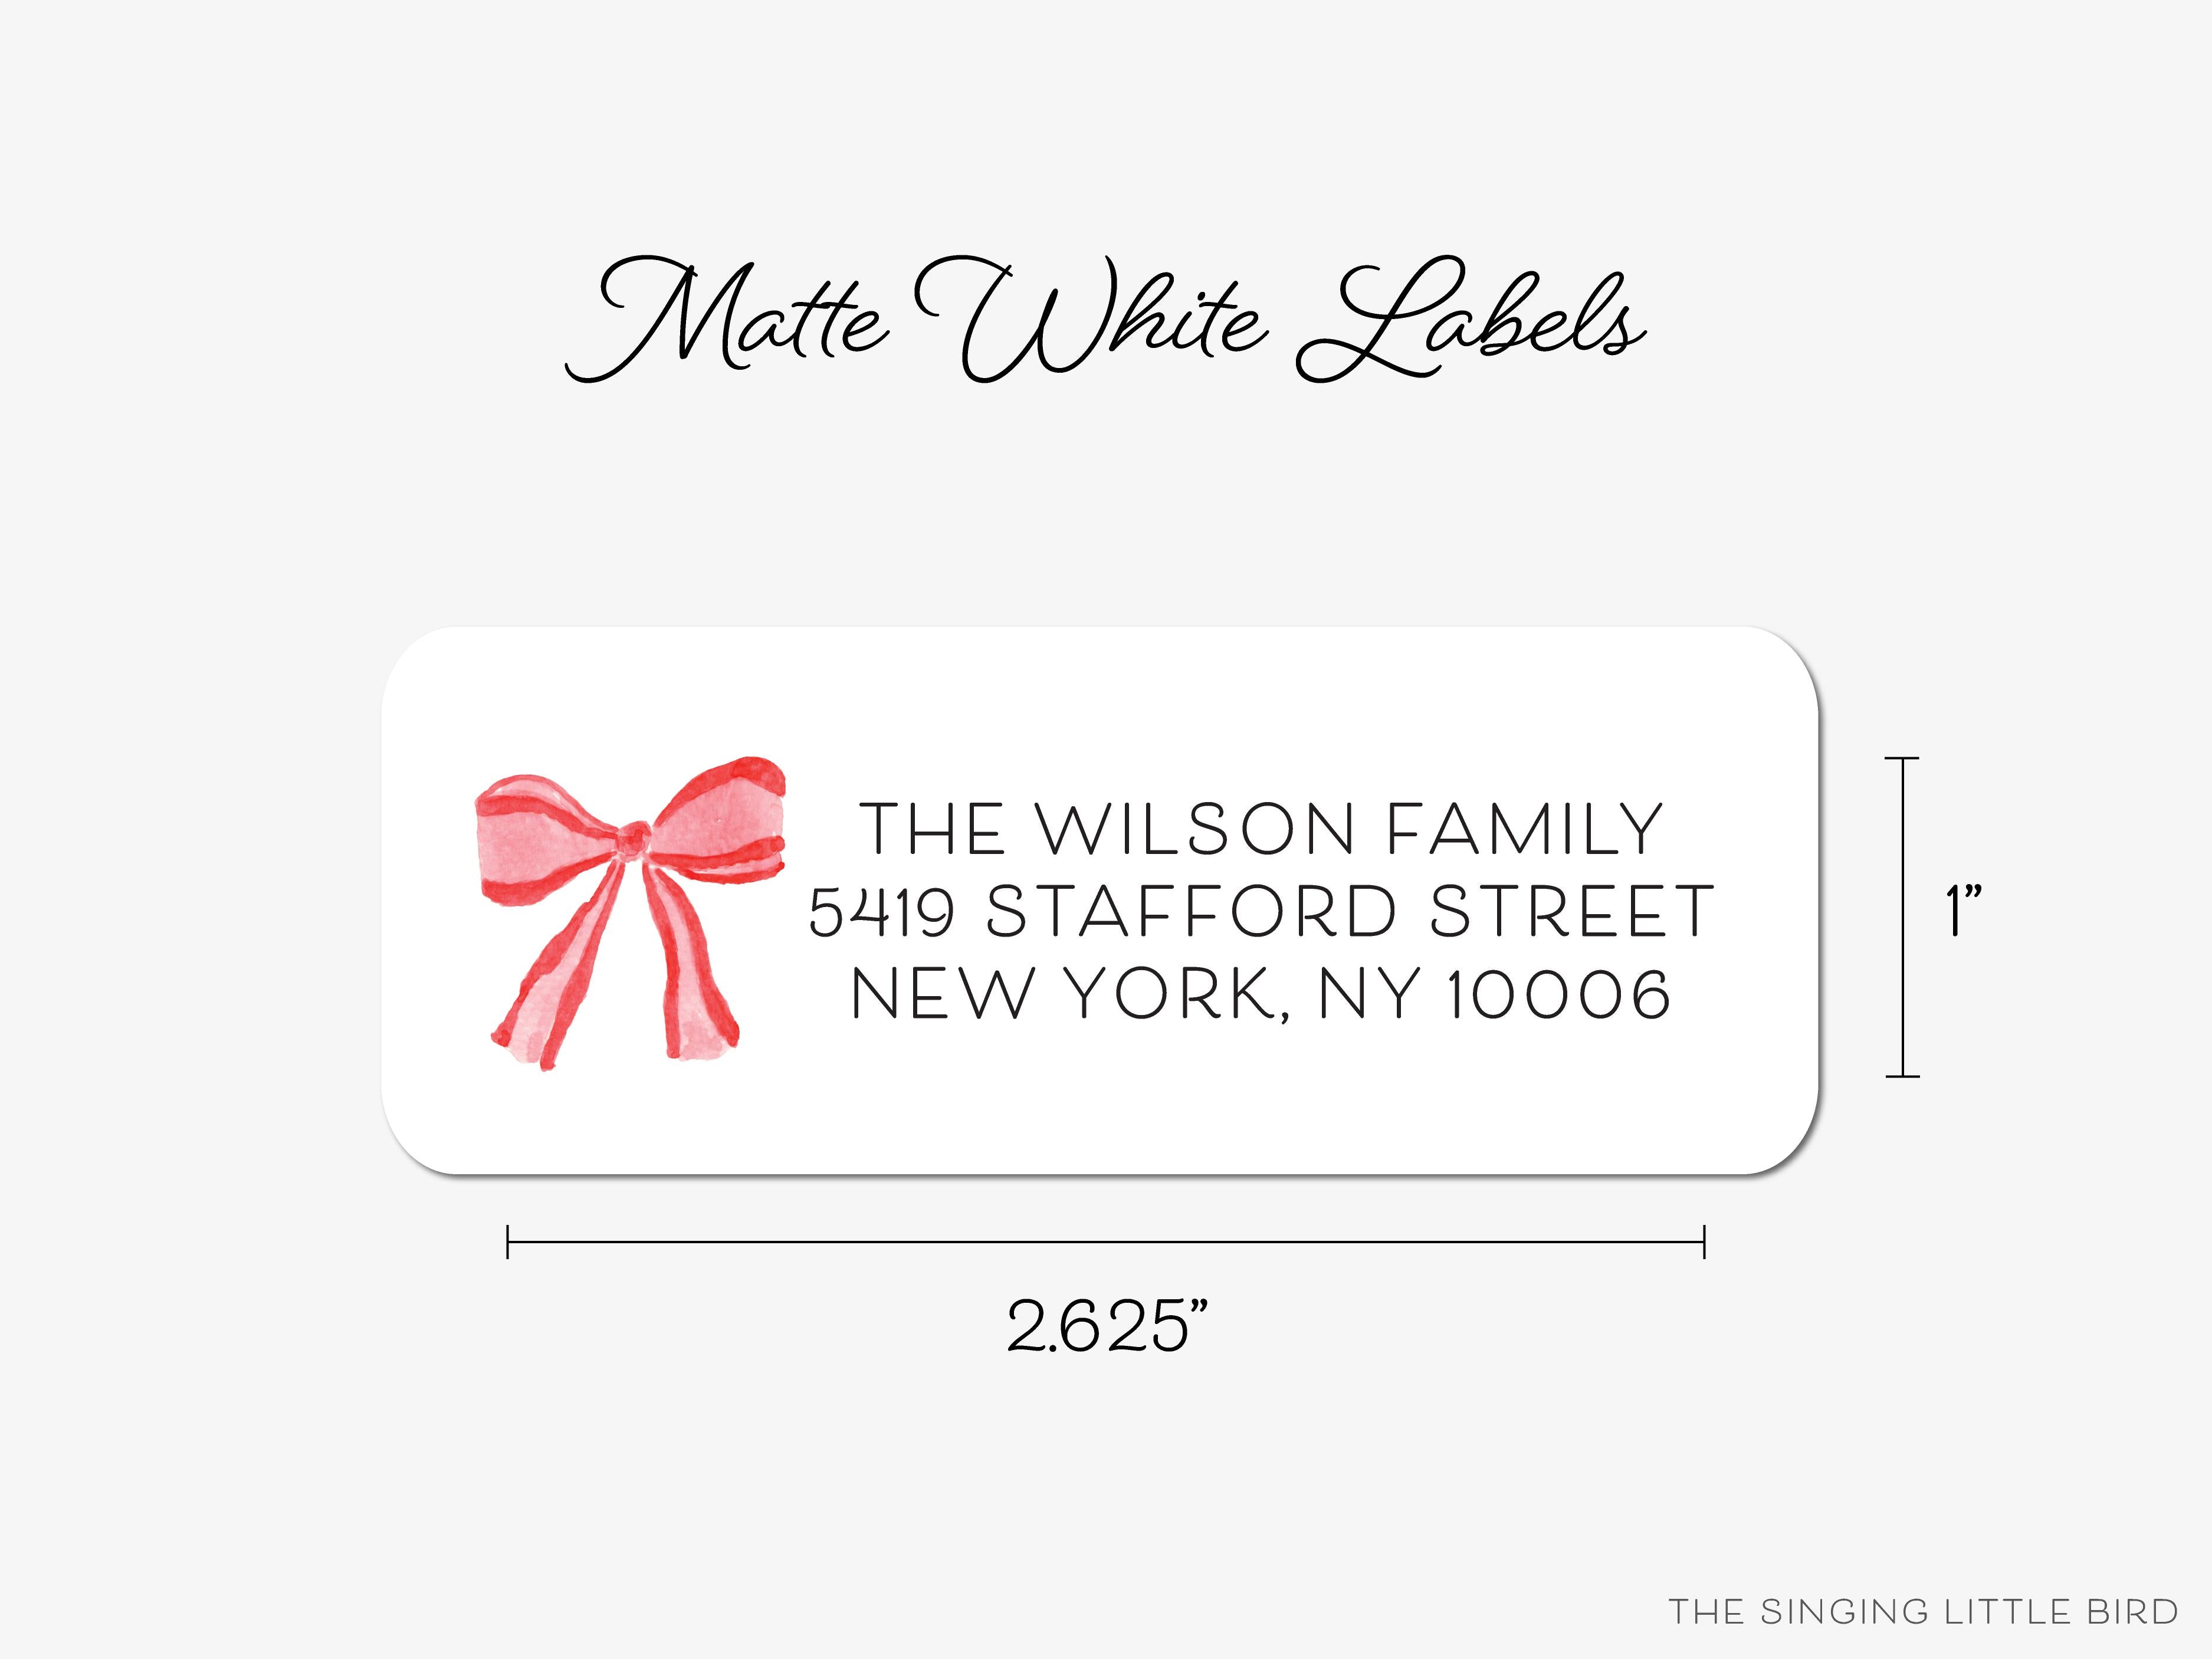 Red Bow Return Address Labels-These personalized return address labels are 2.625" x 1" and feature our hand-painted watercolor bow, printed in the USA on beautiful matte finish labels. These make great gifts for yourself or the bow lover.-The Singing Little Bird